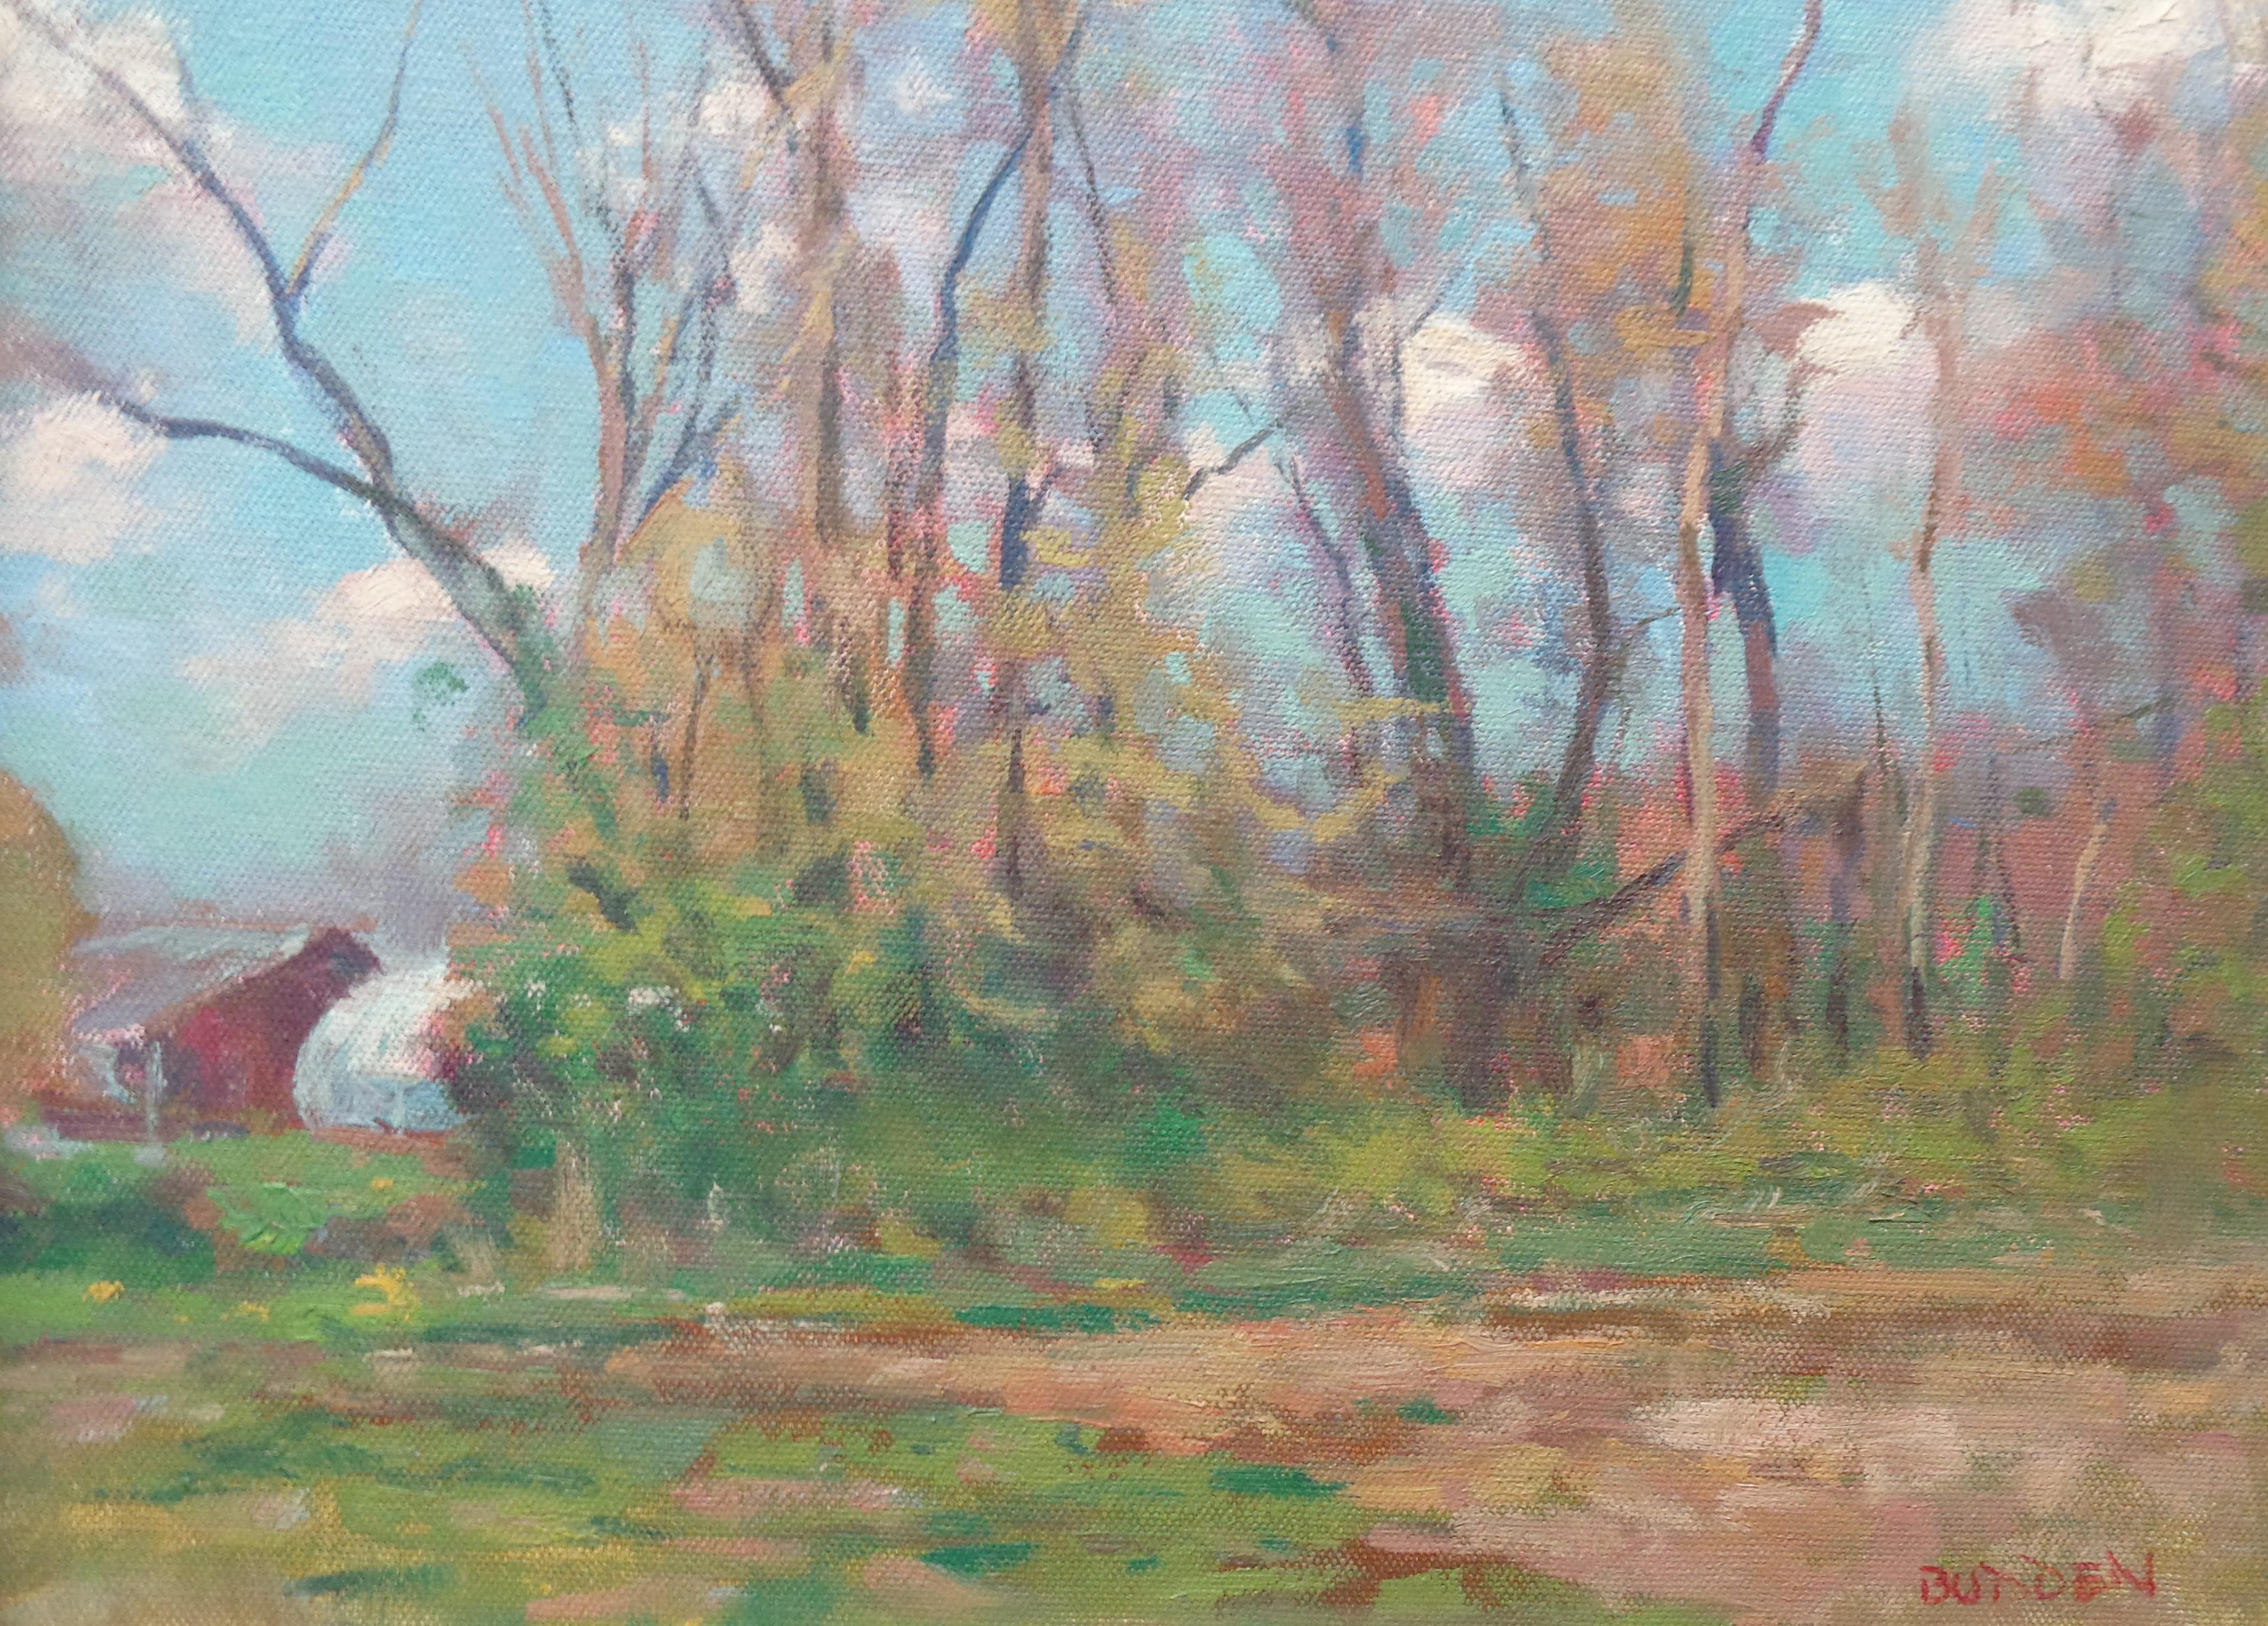  Landscape Impressionistic Oil Painting Springtime by Michael Budden For Sale 3